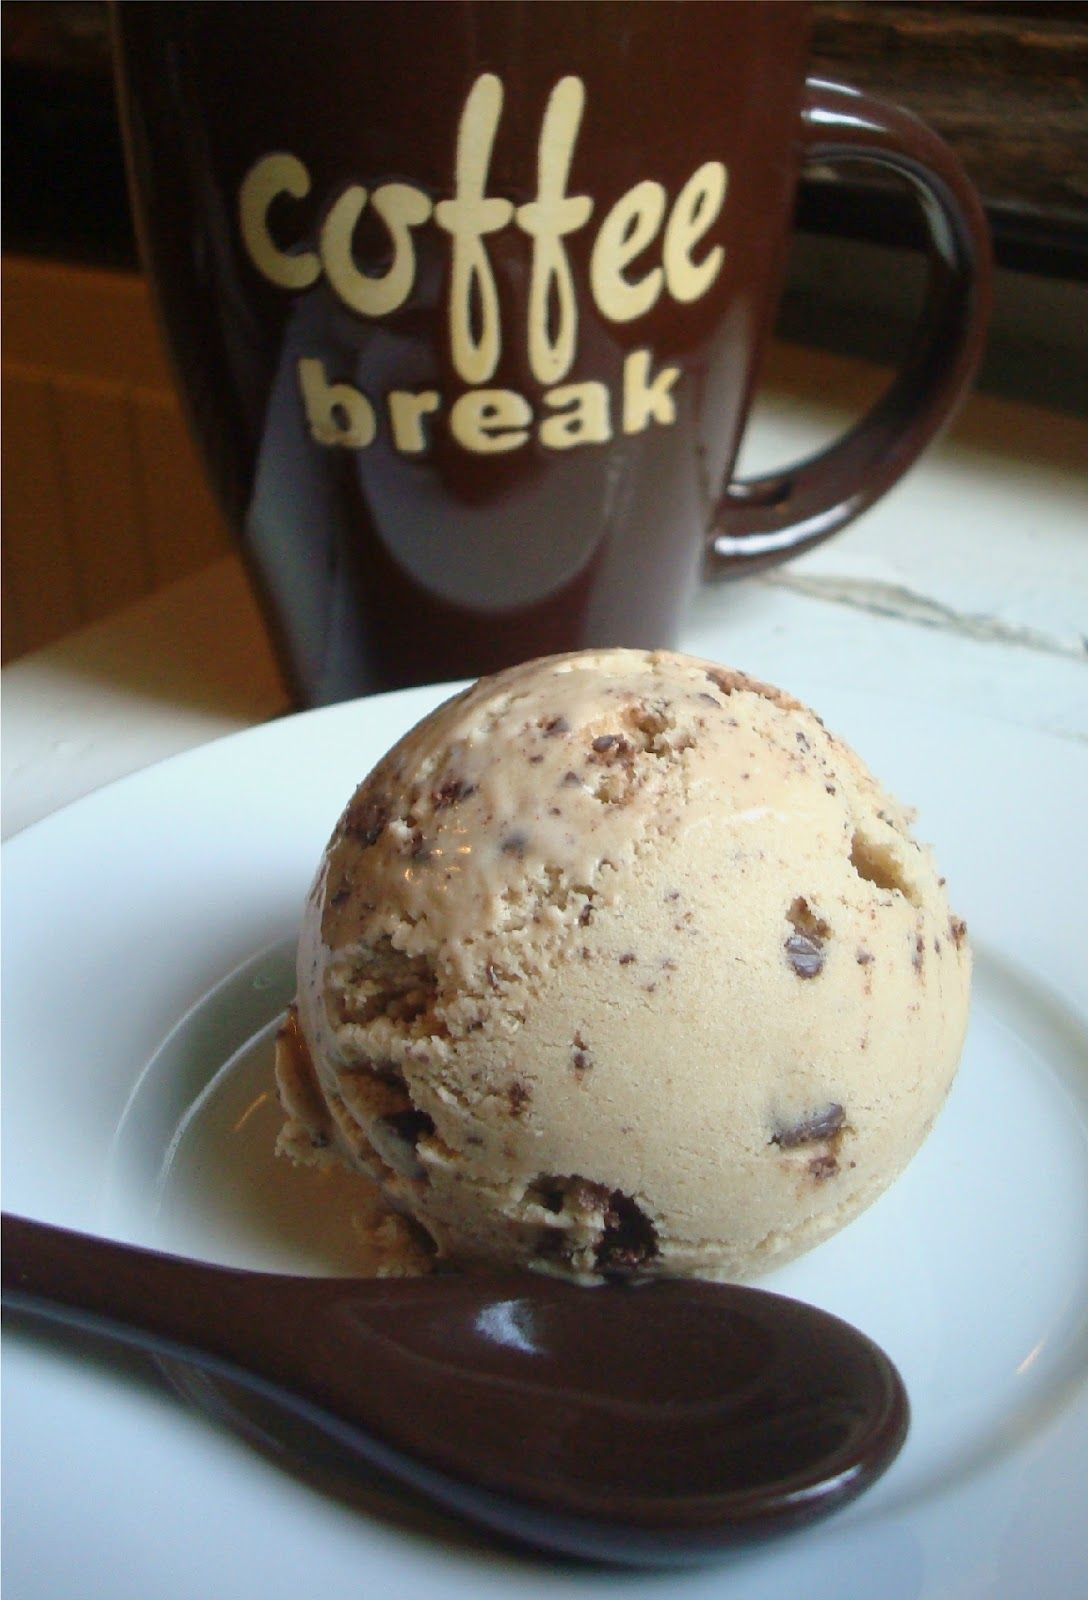 Nuts about food: “Coffee Chocolate Chip Ice Cream” recipe (it requires an ice cream machine)